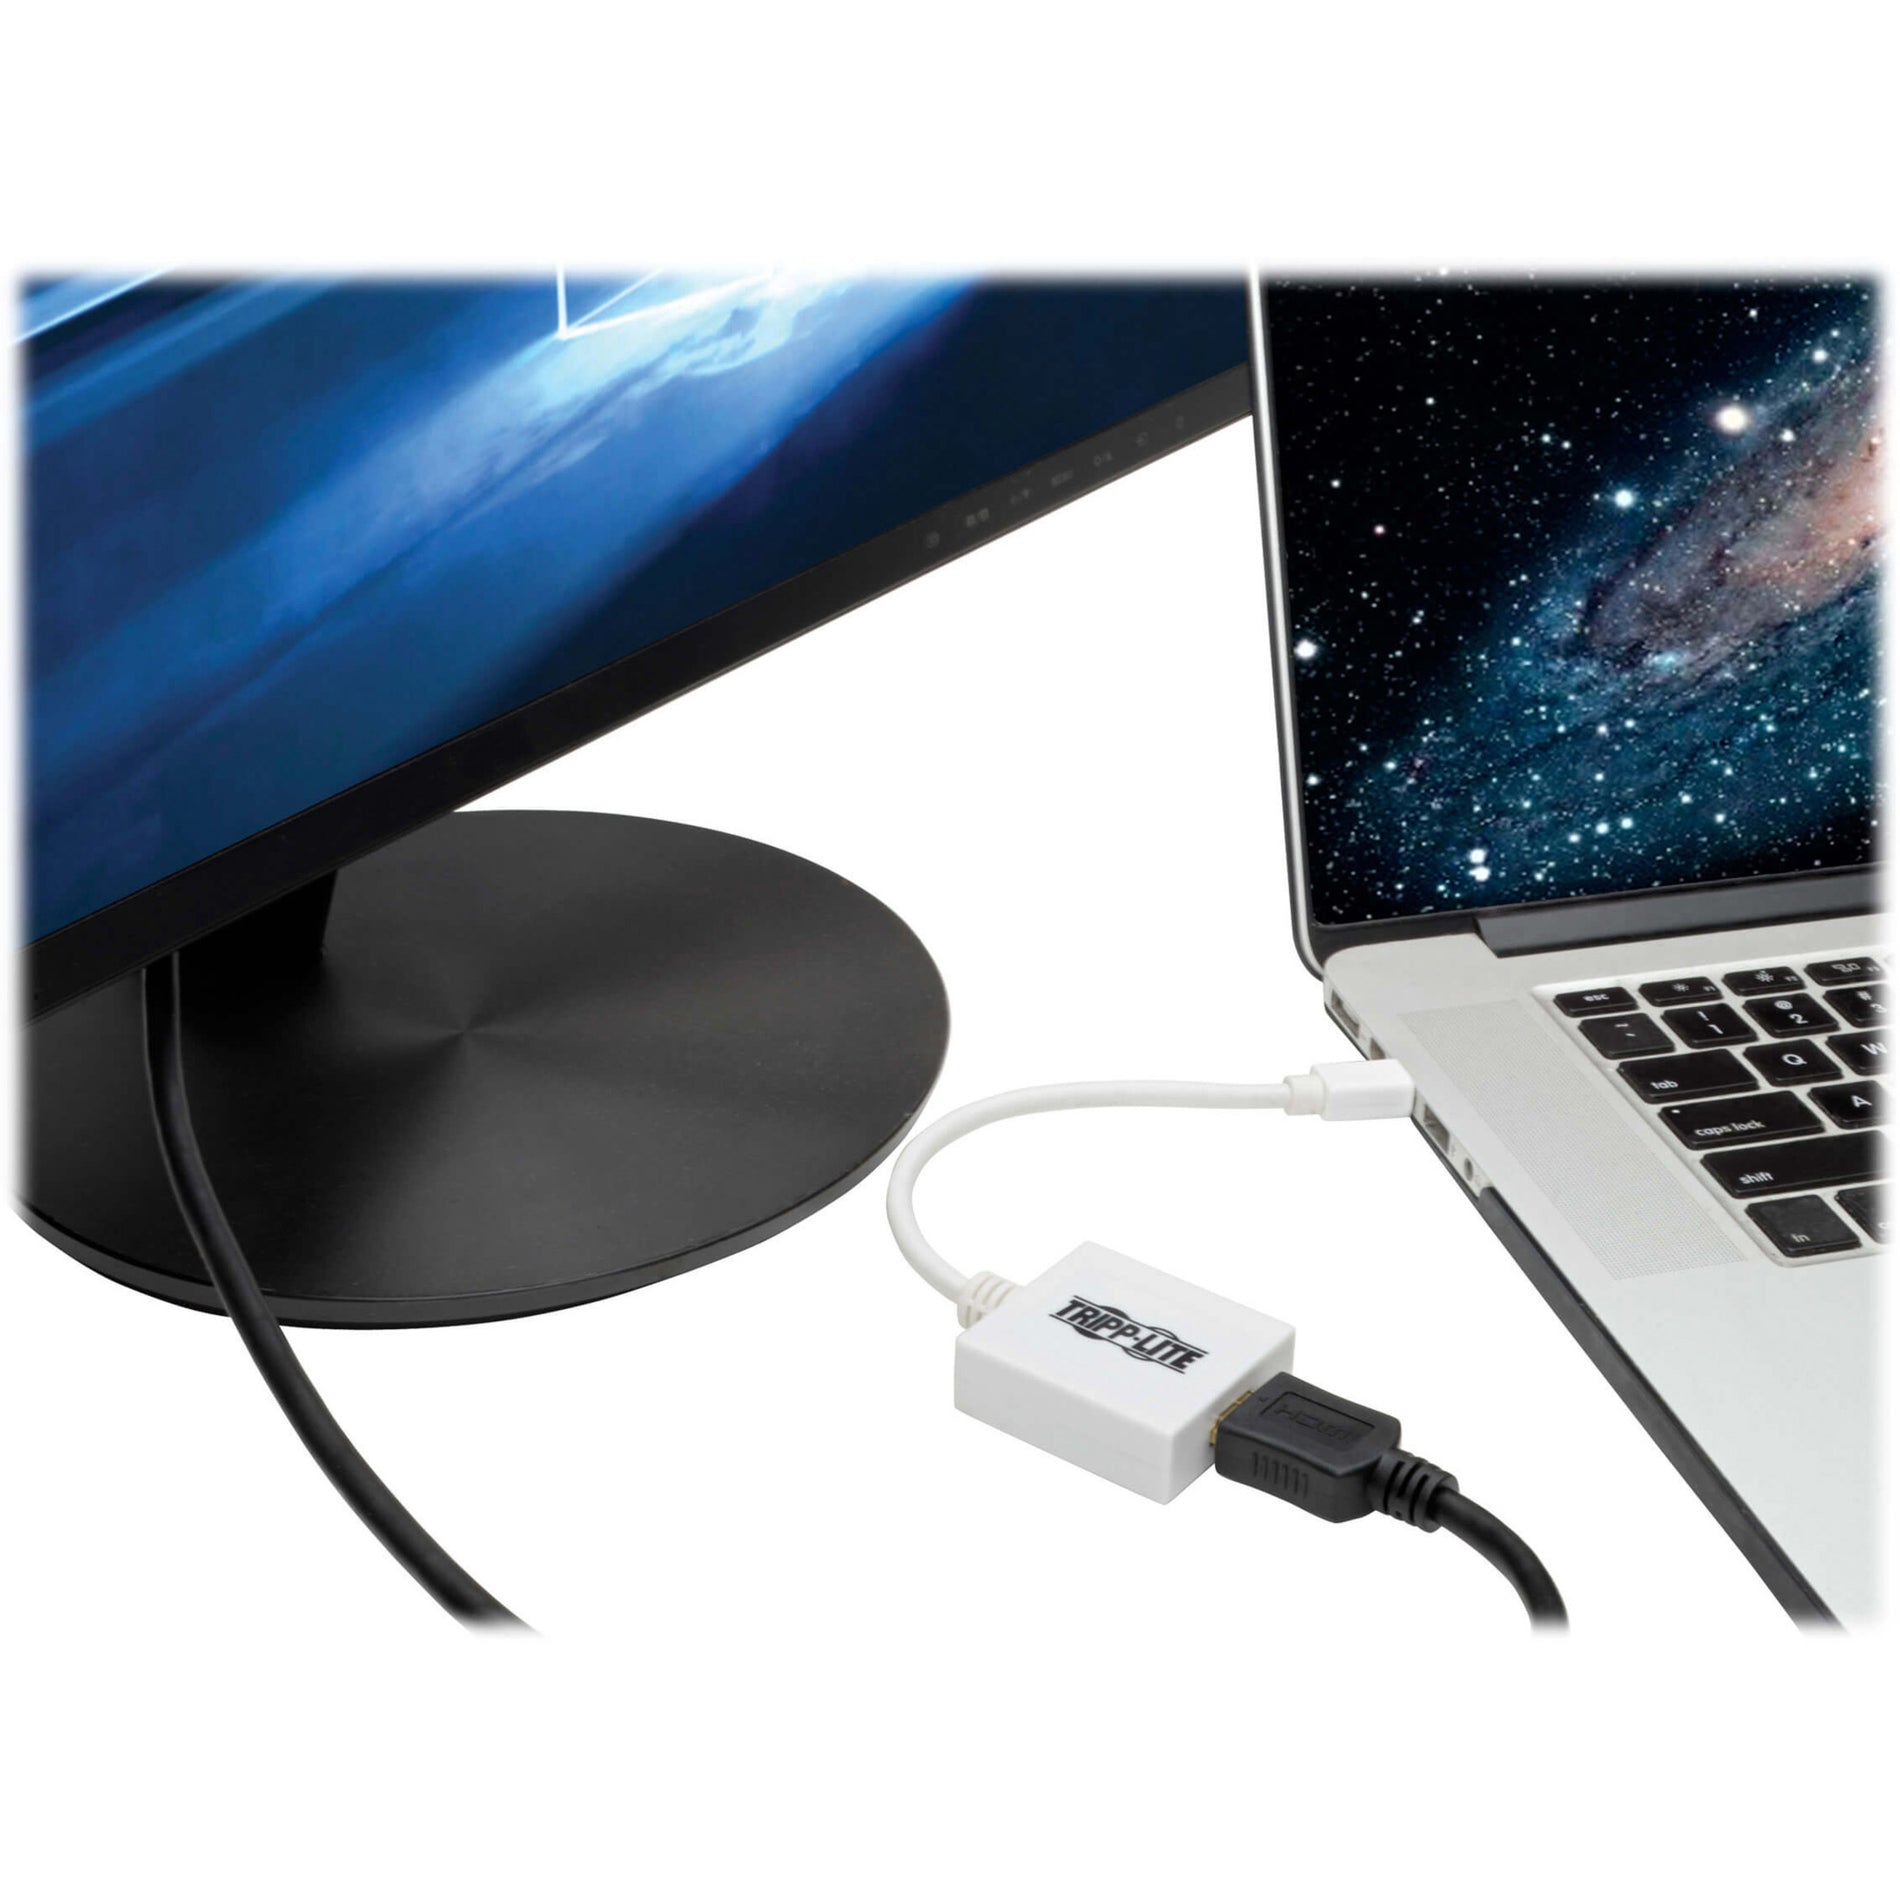 Tripp Lite P137-06N-HDMI Mini DisplayPort to HDMI Adapter, White - Connect Your Mac or PC to a HDMI Monitor